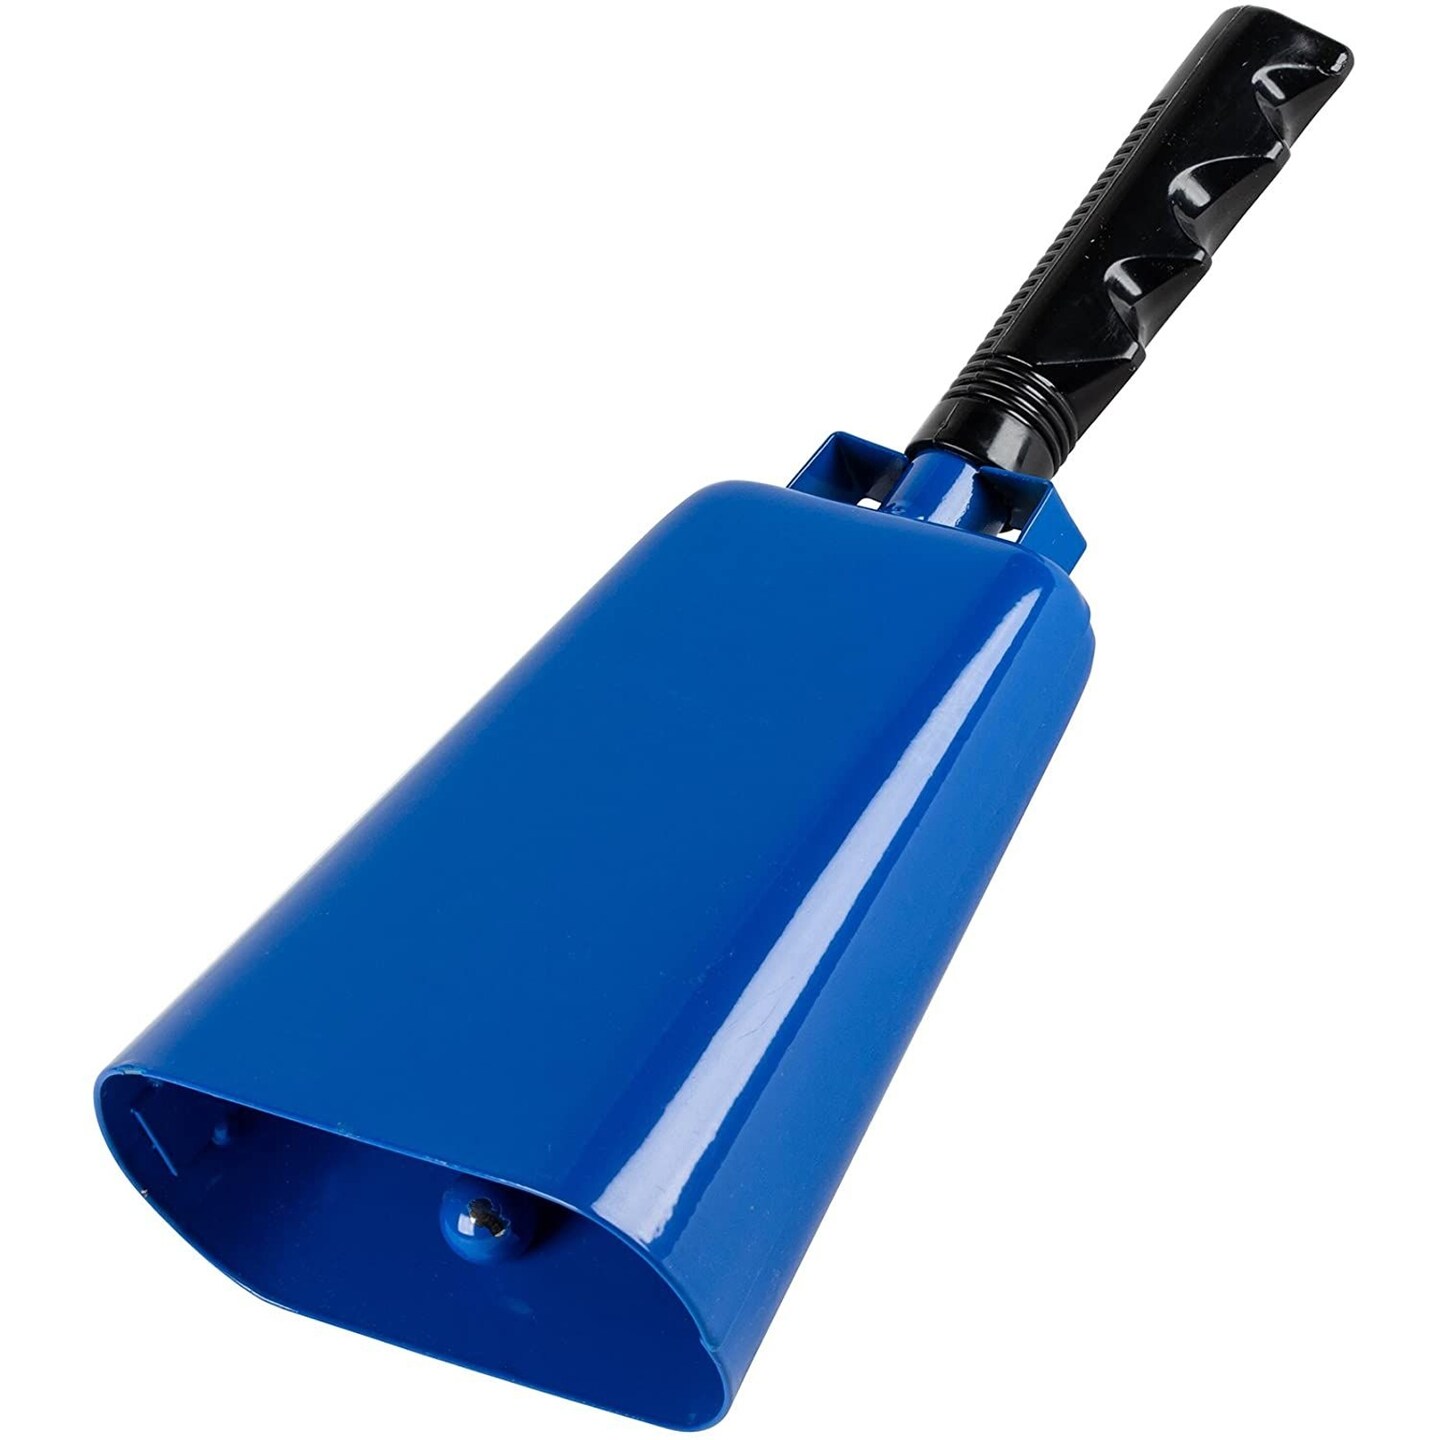 Blue Cowbell with Handle for Football - 11-inch Loud Cow Bell Noisemakers for Sports Games, Weddings, Farm